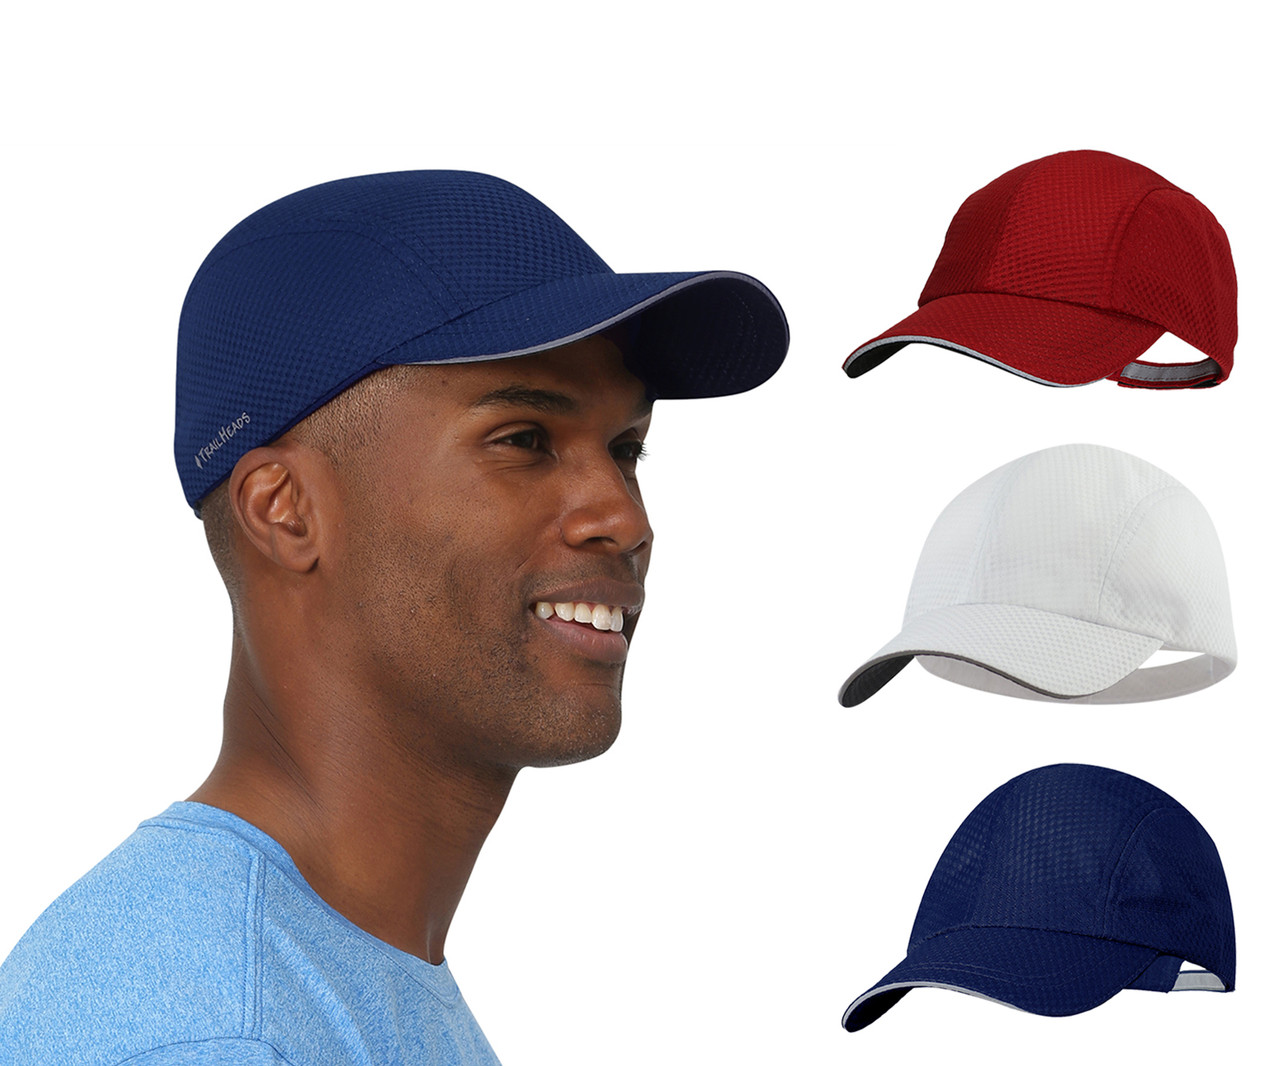 https://cdn11.bigcommerce.com/s-558hrkjw/images/stencil/1280x1280/products/494/6863/mens_3_pack_running_hats_and_caps_for_men__84267.1653676318.jpg?c=2